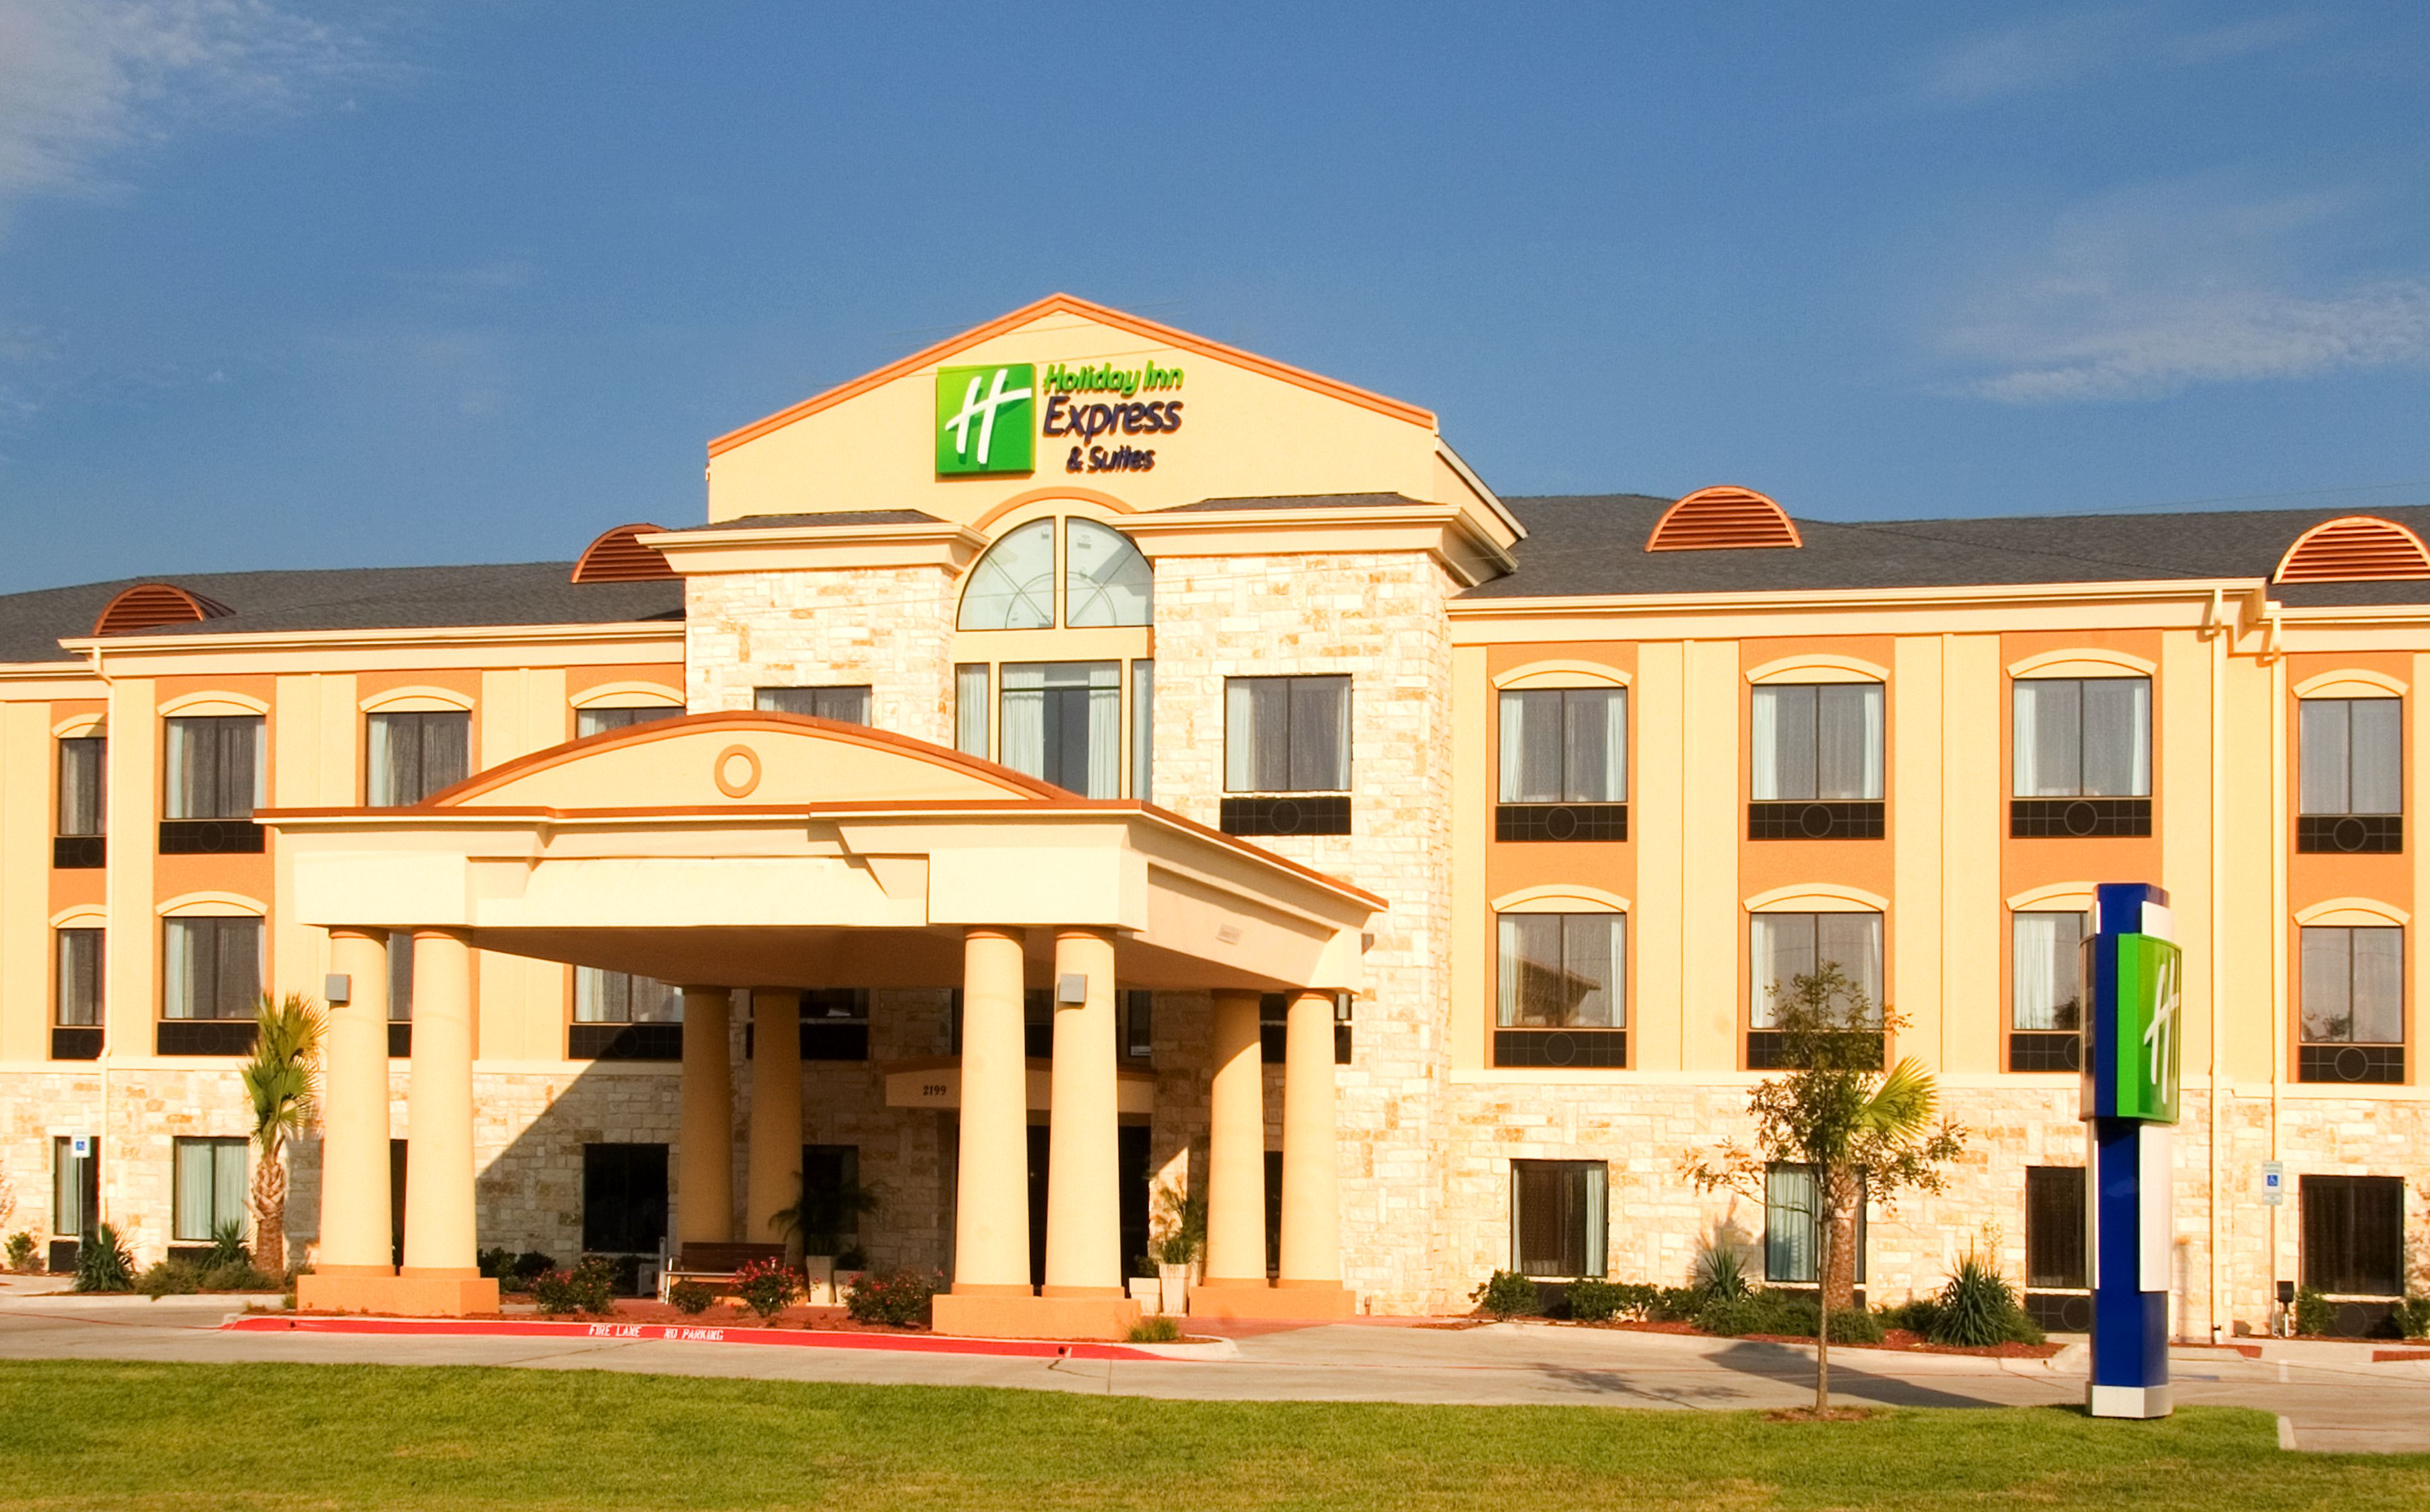 holiday-inn-express-and-suites-beeville-2532665384-original.jpg